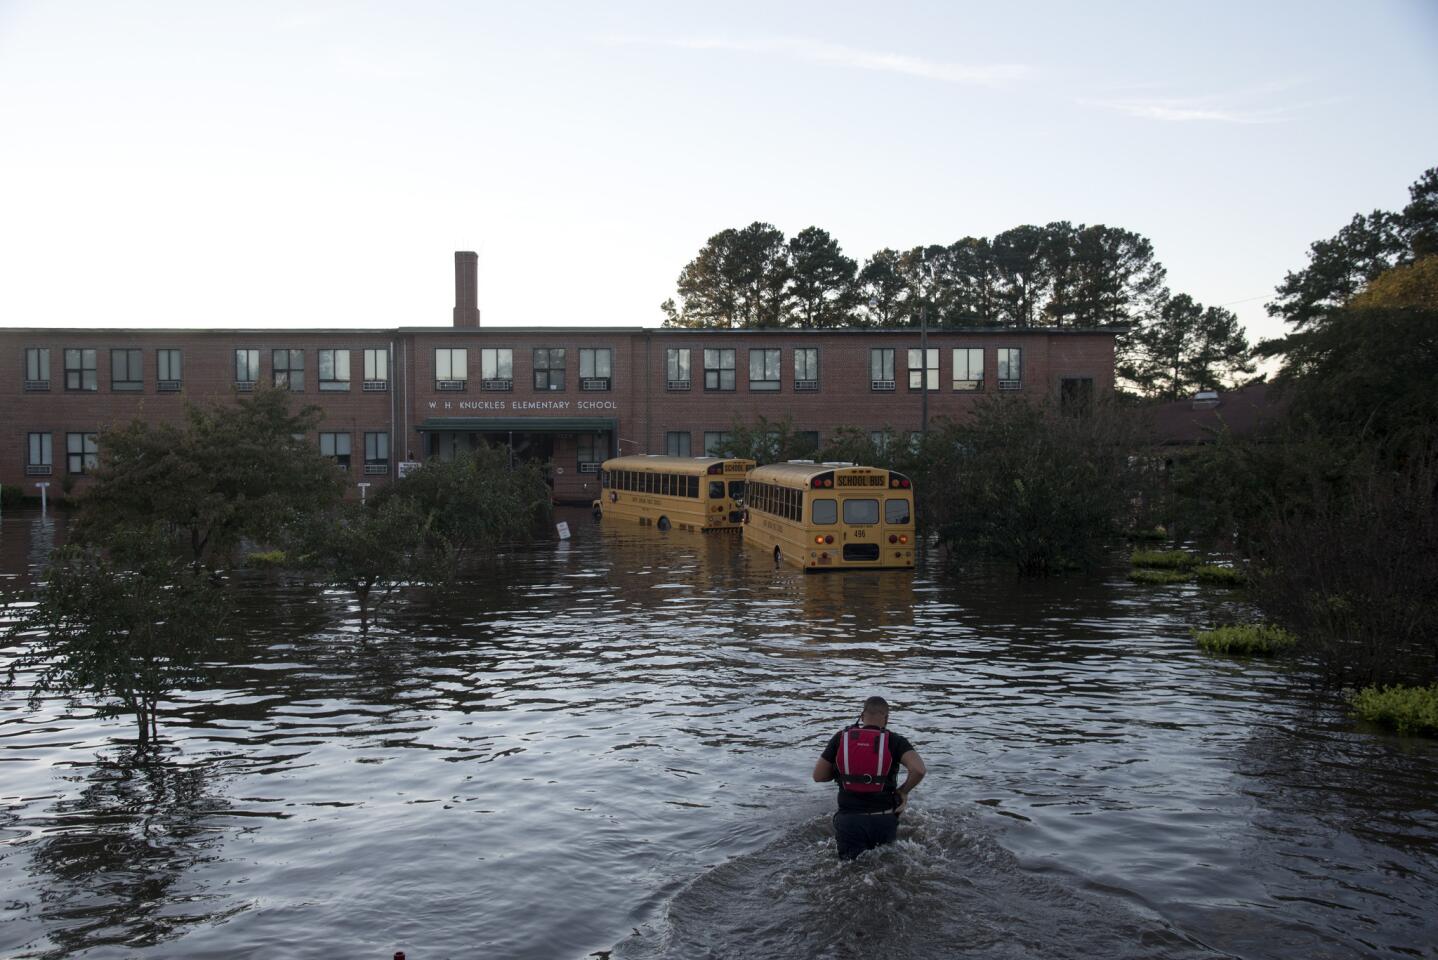 A volunteer firefighter with the Raynham-McDonald Fire Department makes his way through floodwaters after Hurricane Matthew to turn off the lights of a school bus in front of W.H. Knuckles Elementary School in Lumberton, North Carolina, on Oct. 10, 2016.